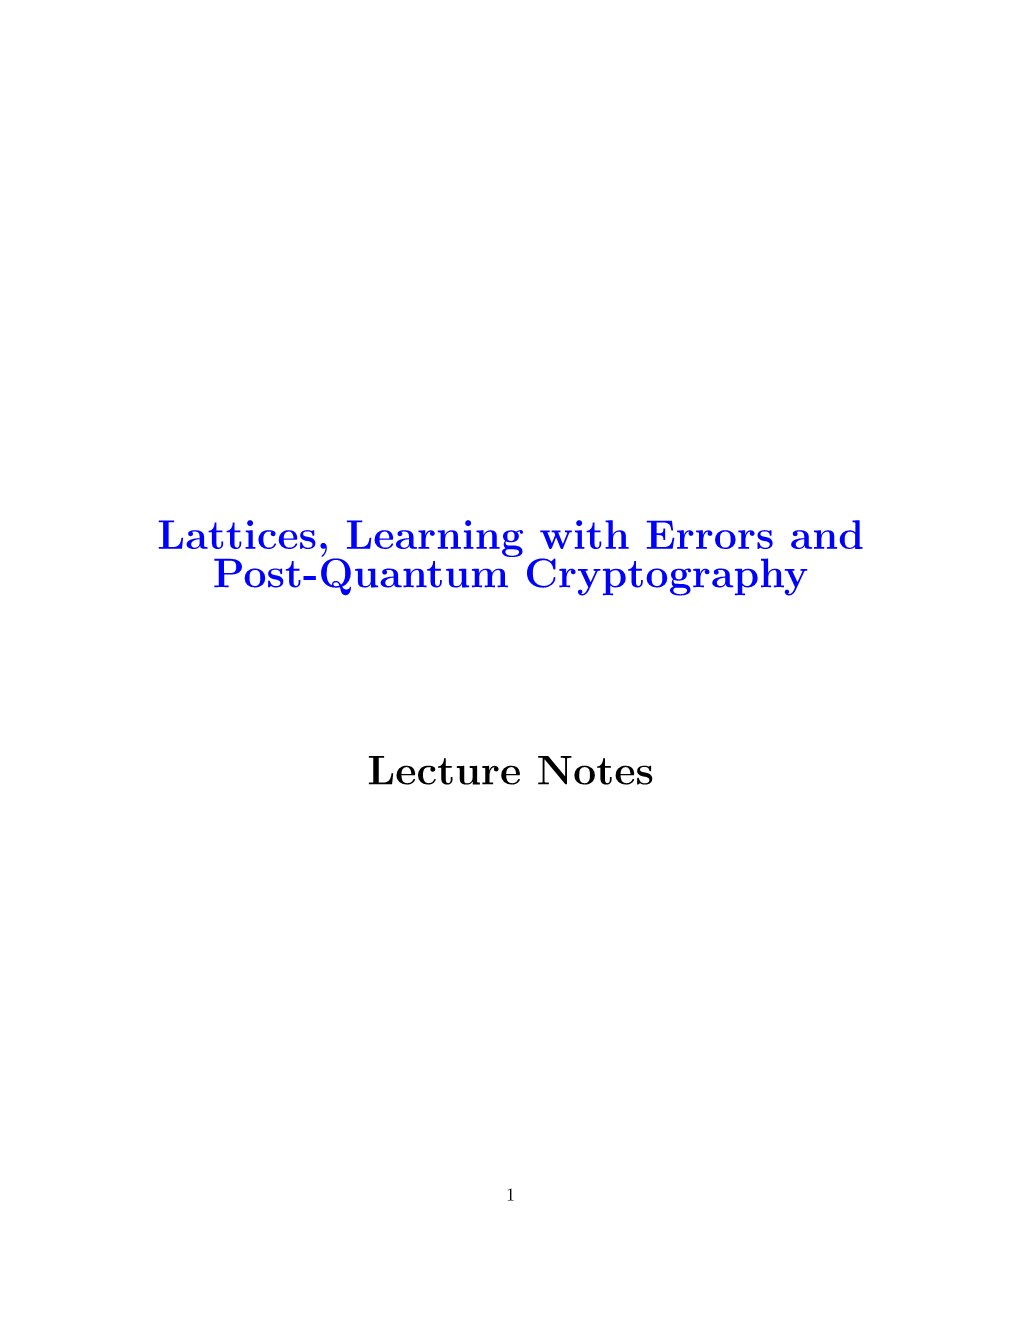 Lattices, Learning with Errors and Post-Quantum Cryptography Lecture